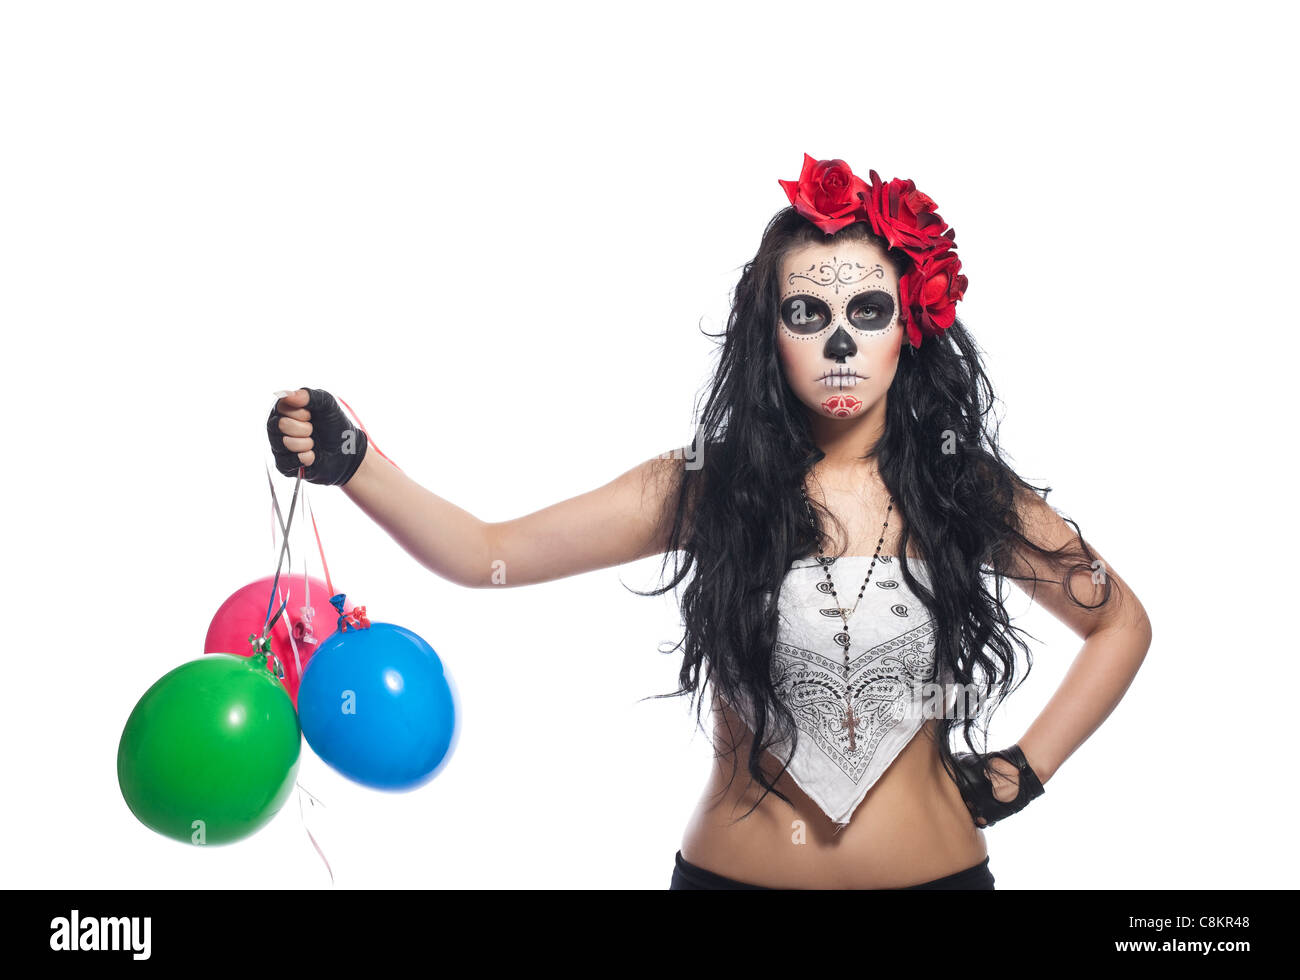 disappointed woman in day of the dead mask with ballons dressed up for All Souls Day Stock Photo